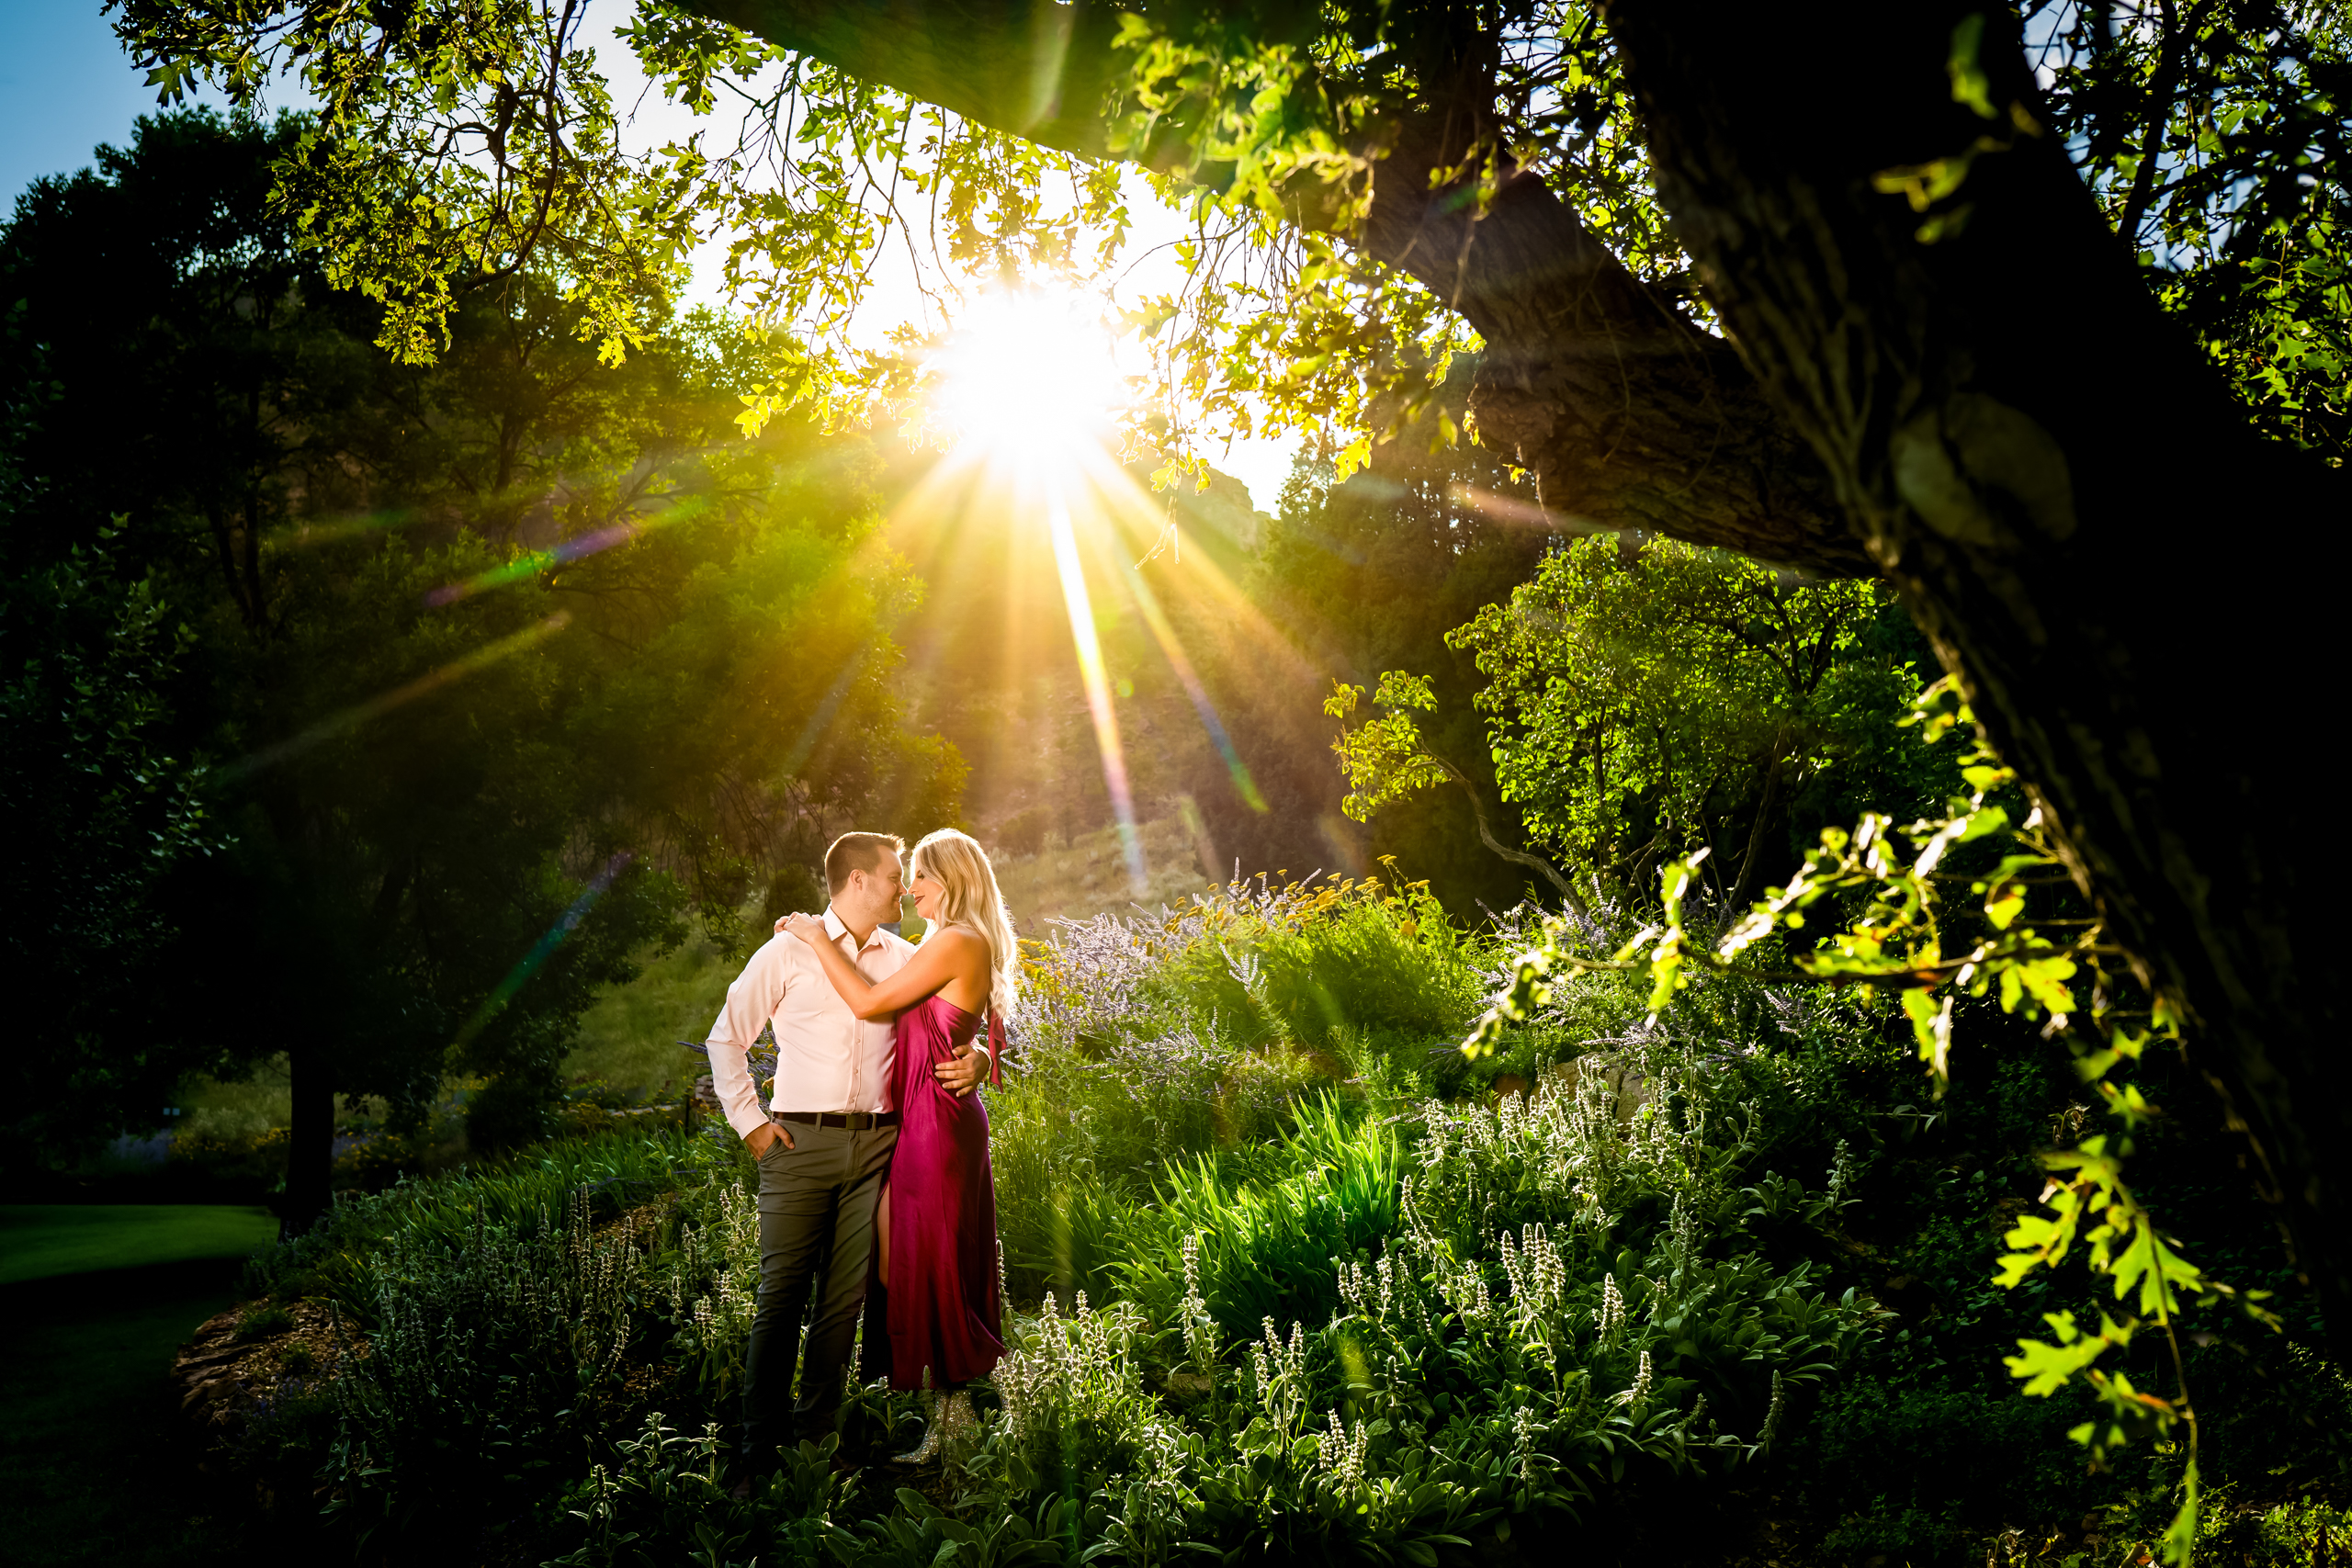 Colorado Springs Engagement Photos: What to Wear to Your Engagement Session